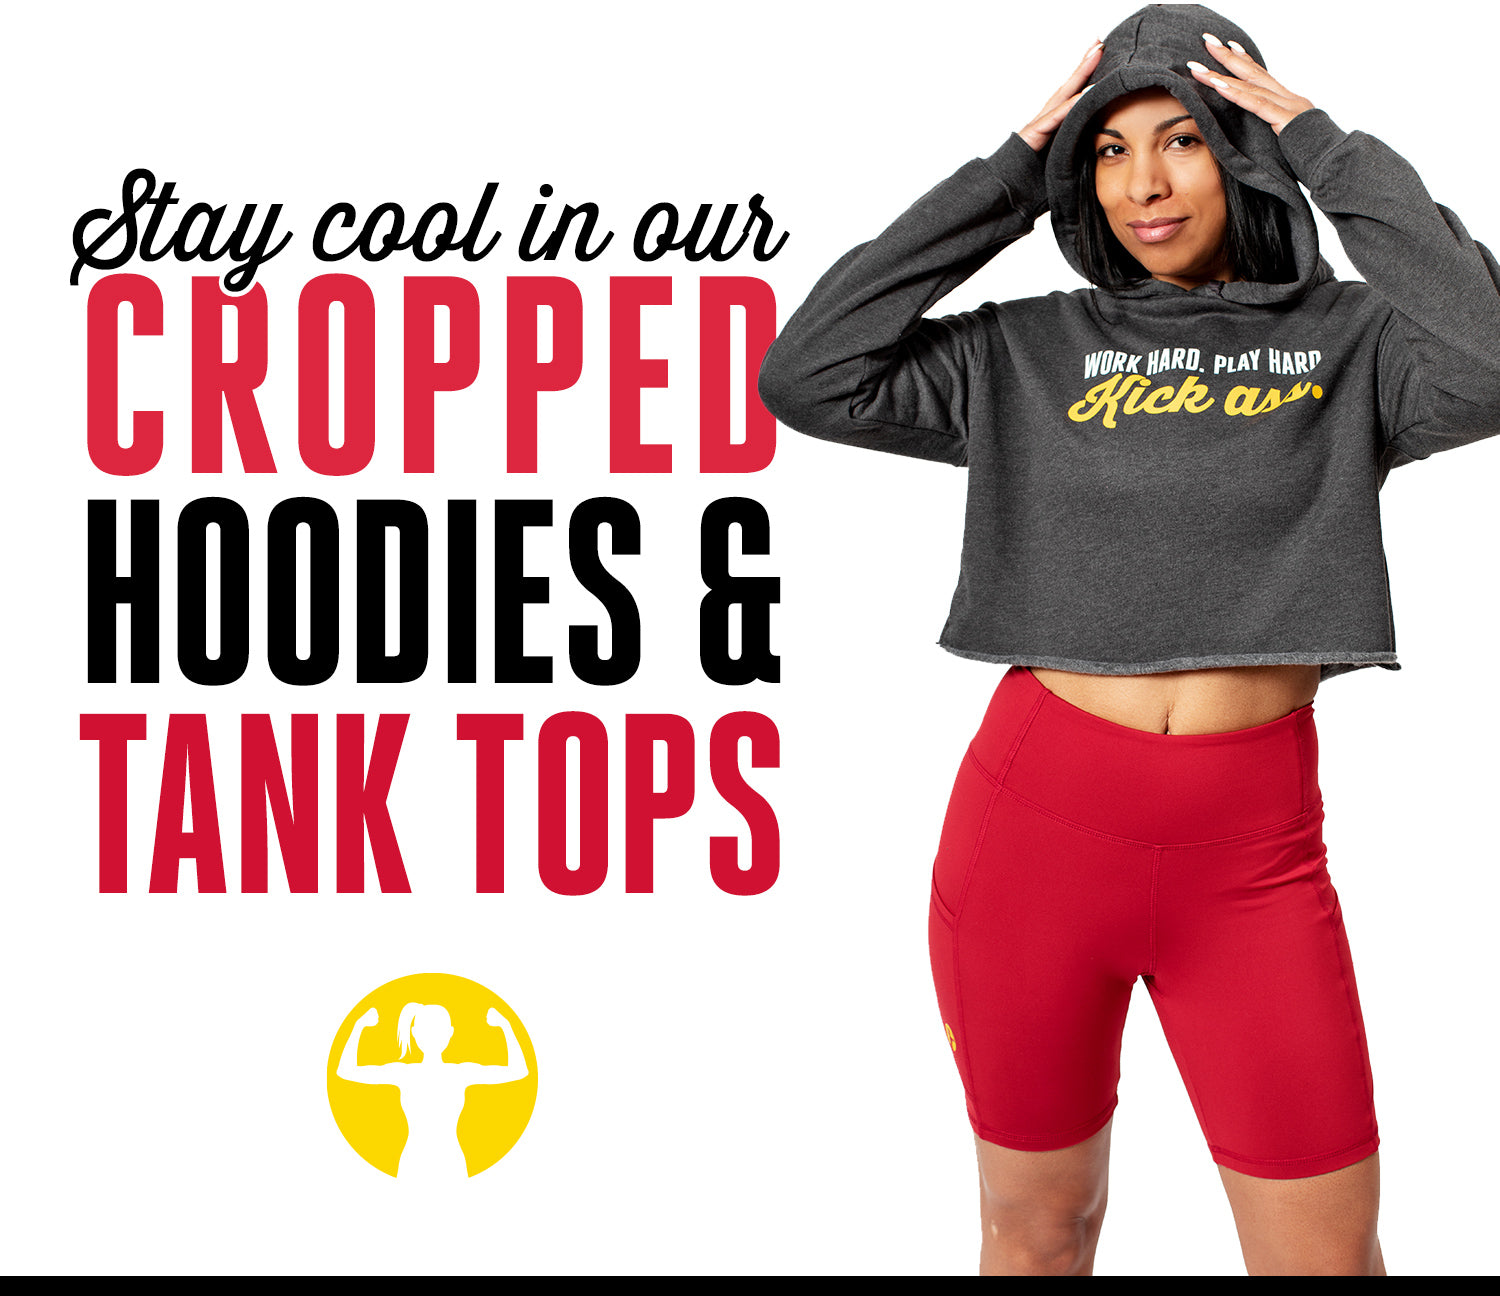 Cropped hoodies and tank tops made in Canada